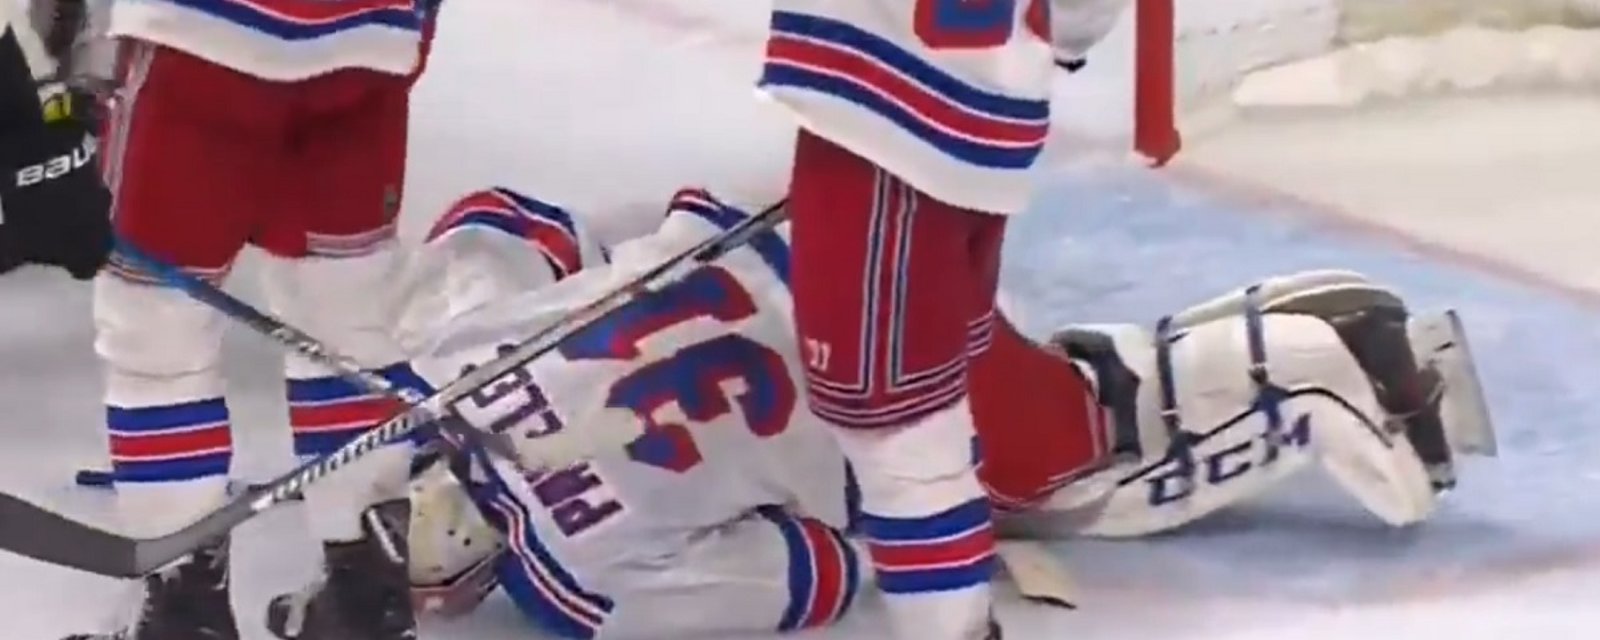 NHL goalie collapses after taking a slap shot to the neck.